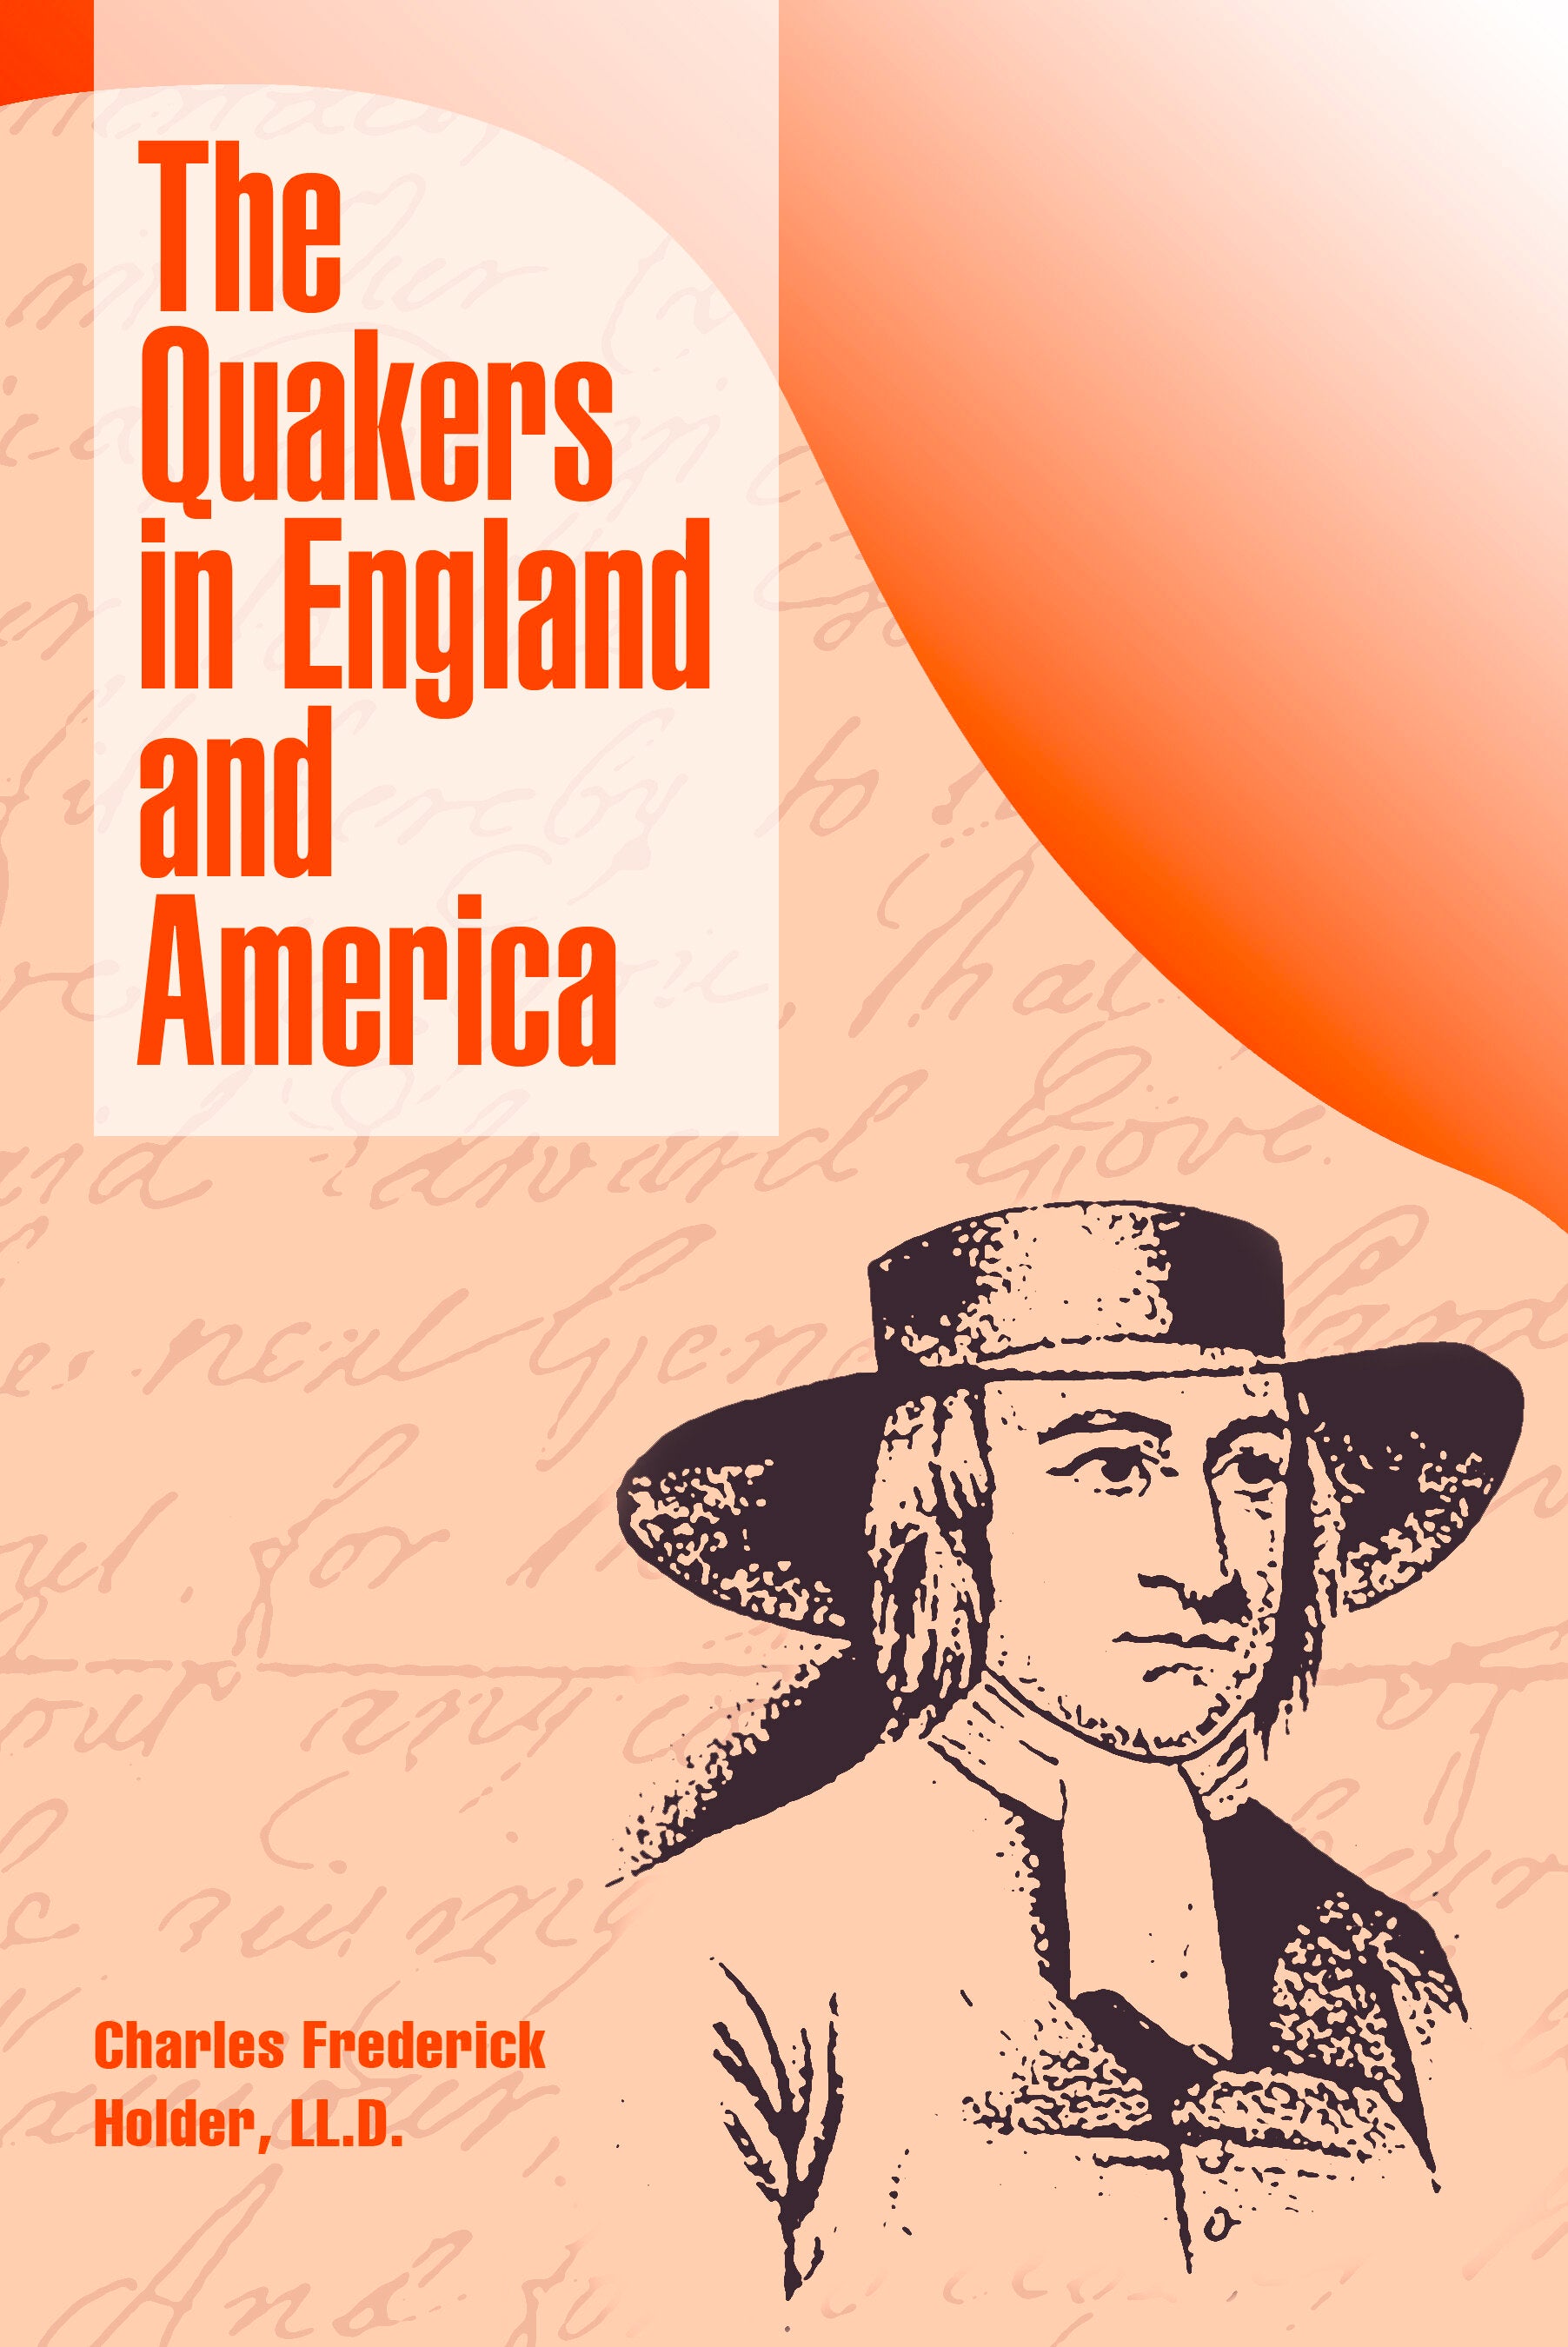 The Quakers in England and America